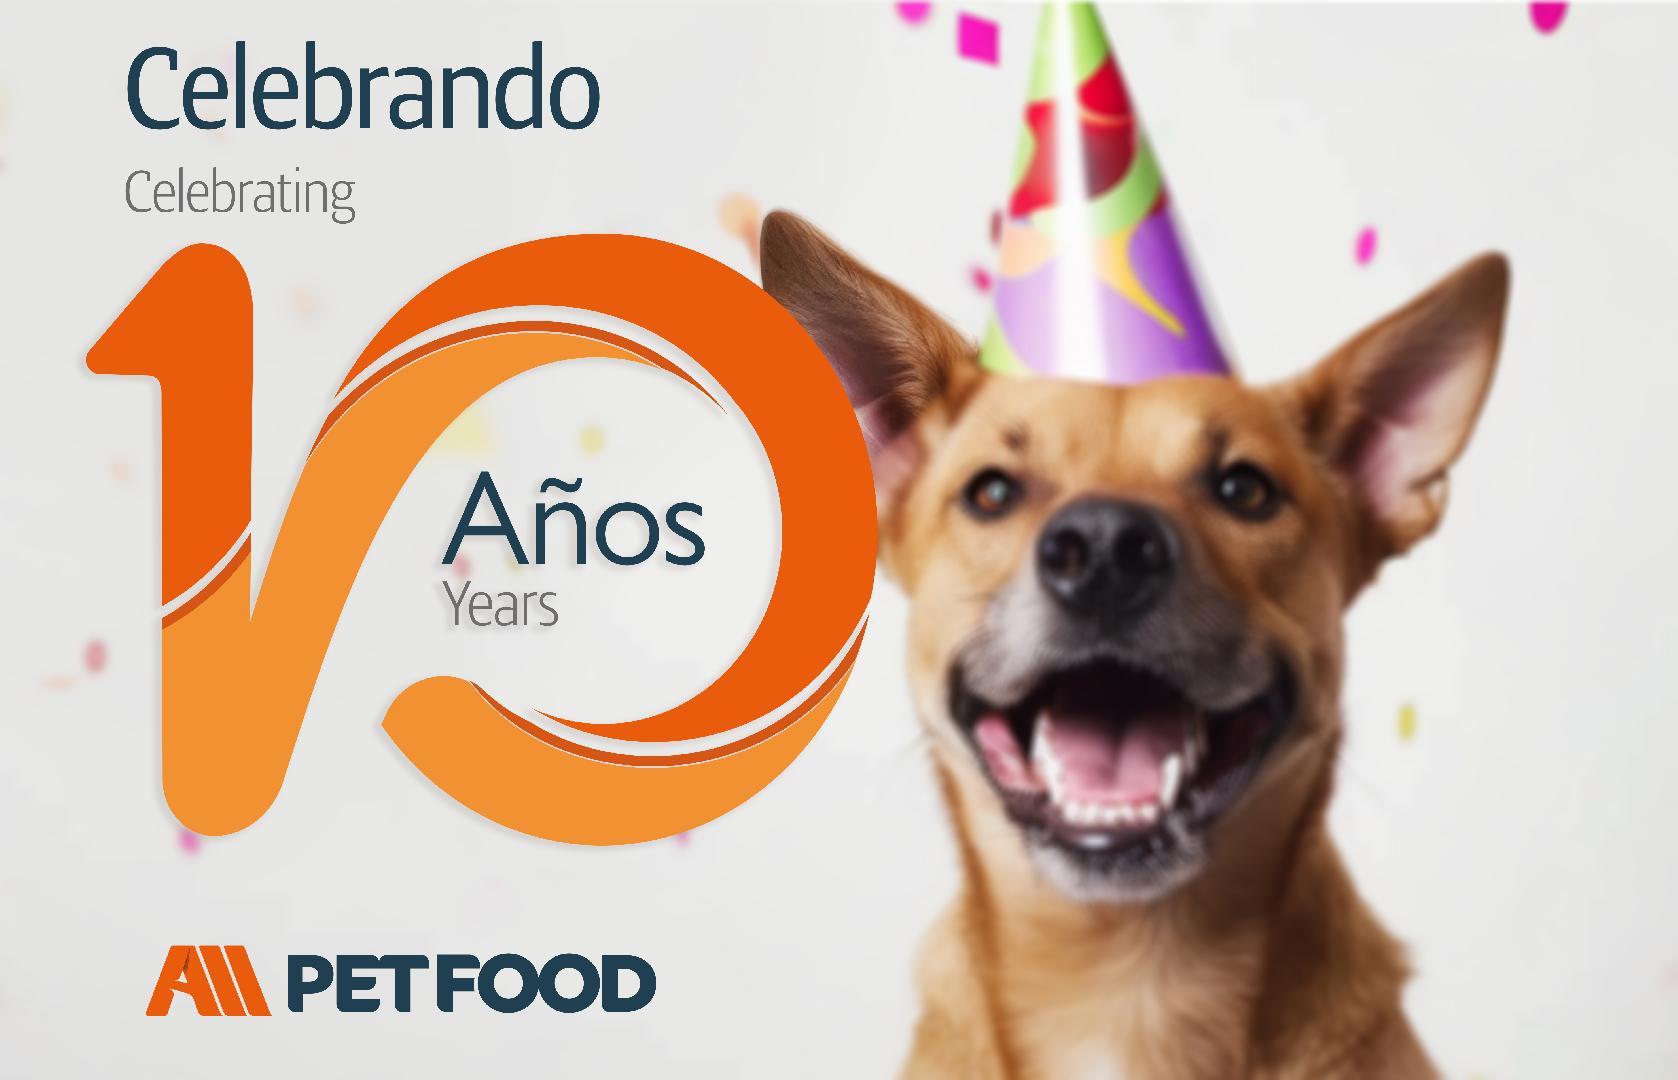 All Pet Food: Celebrating a decade of connections